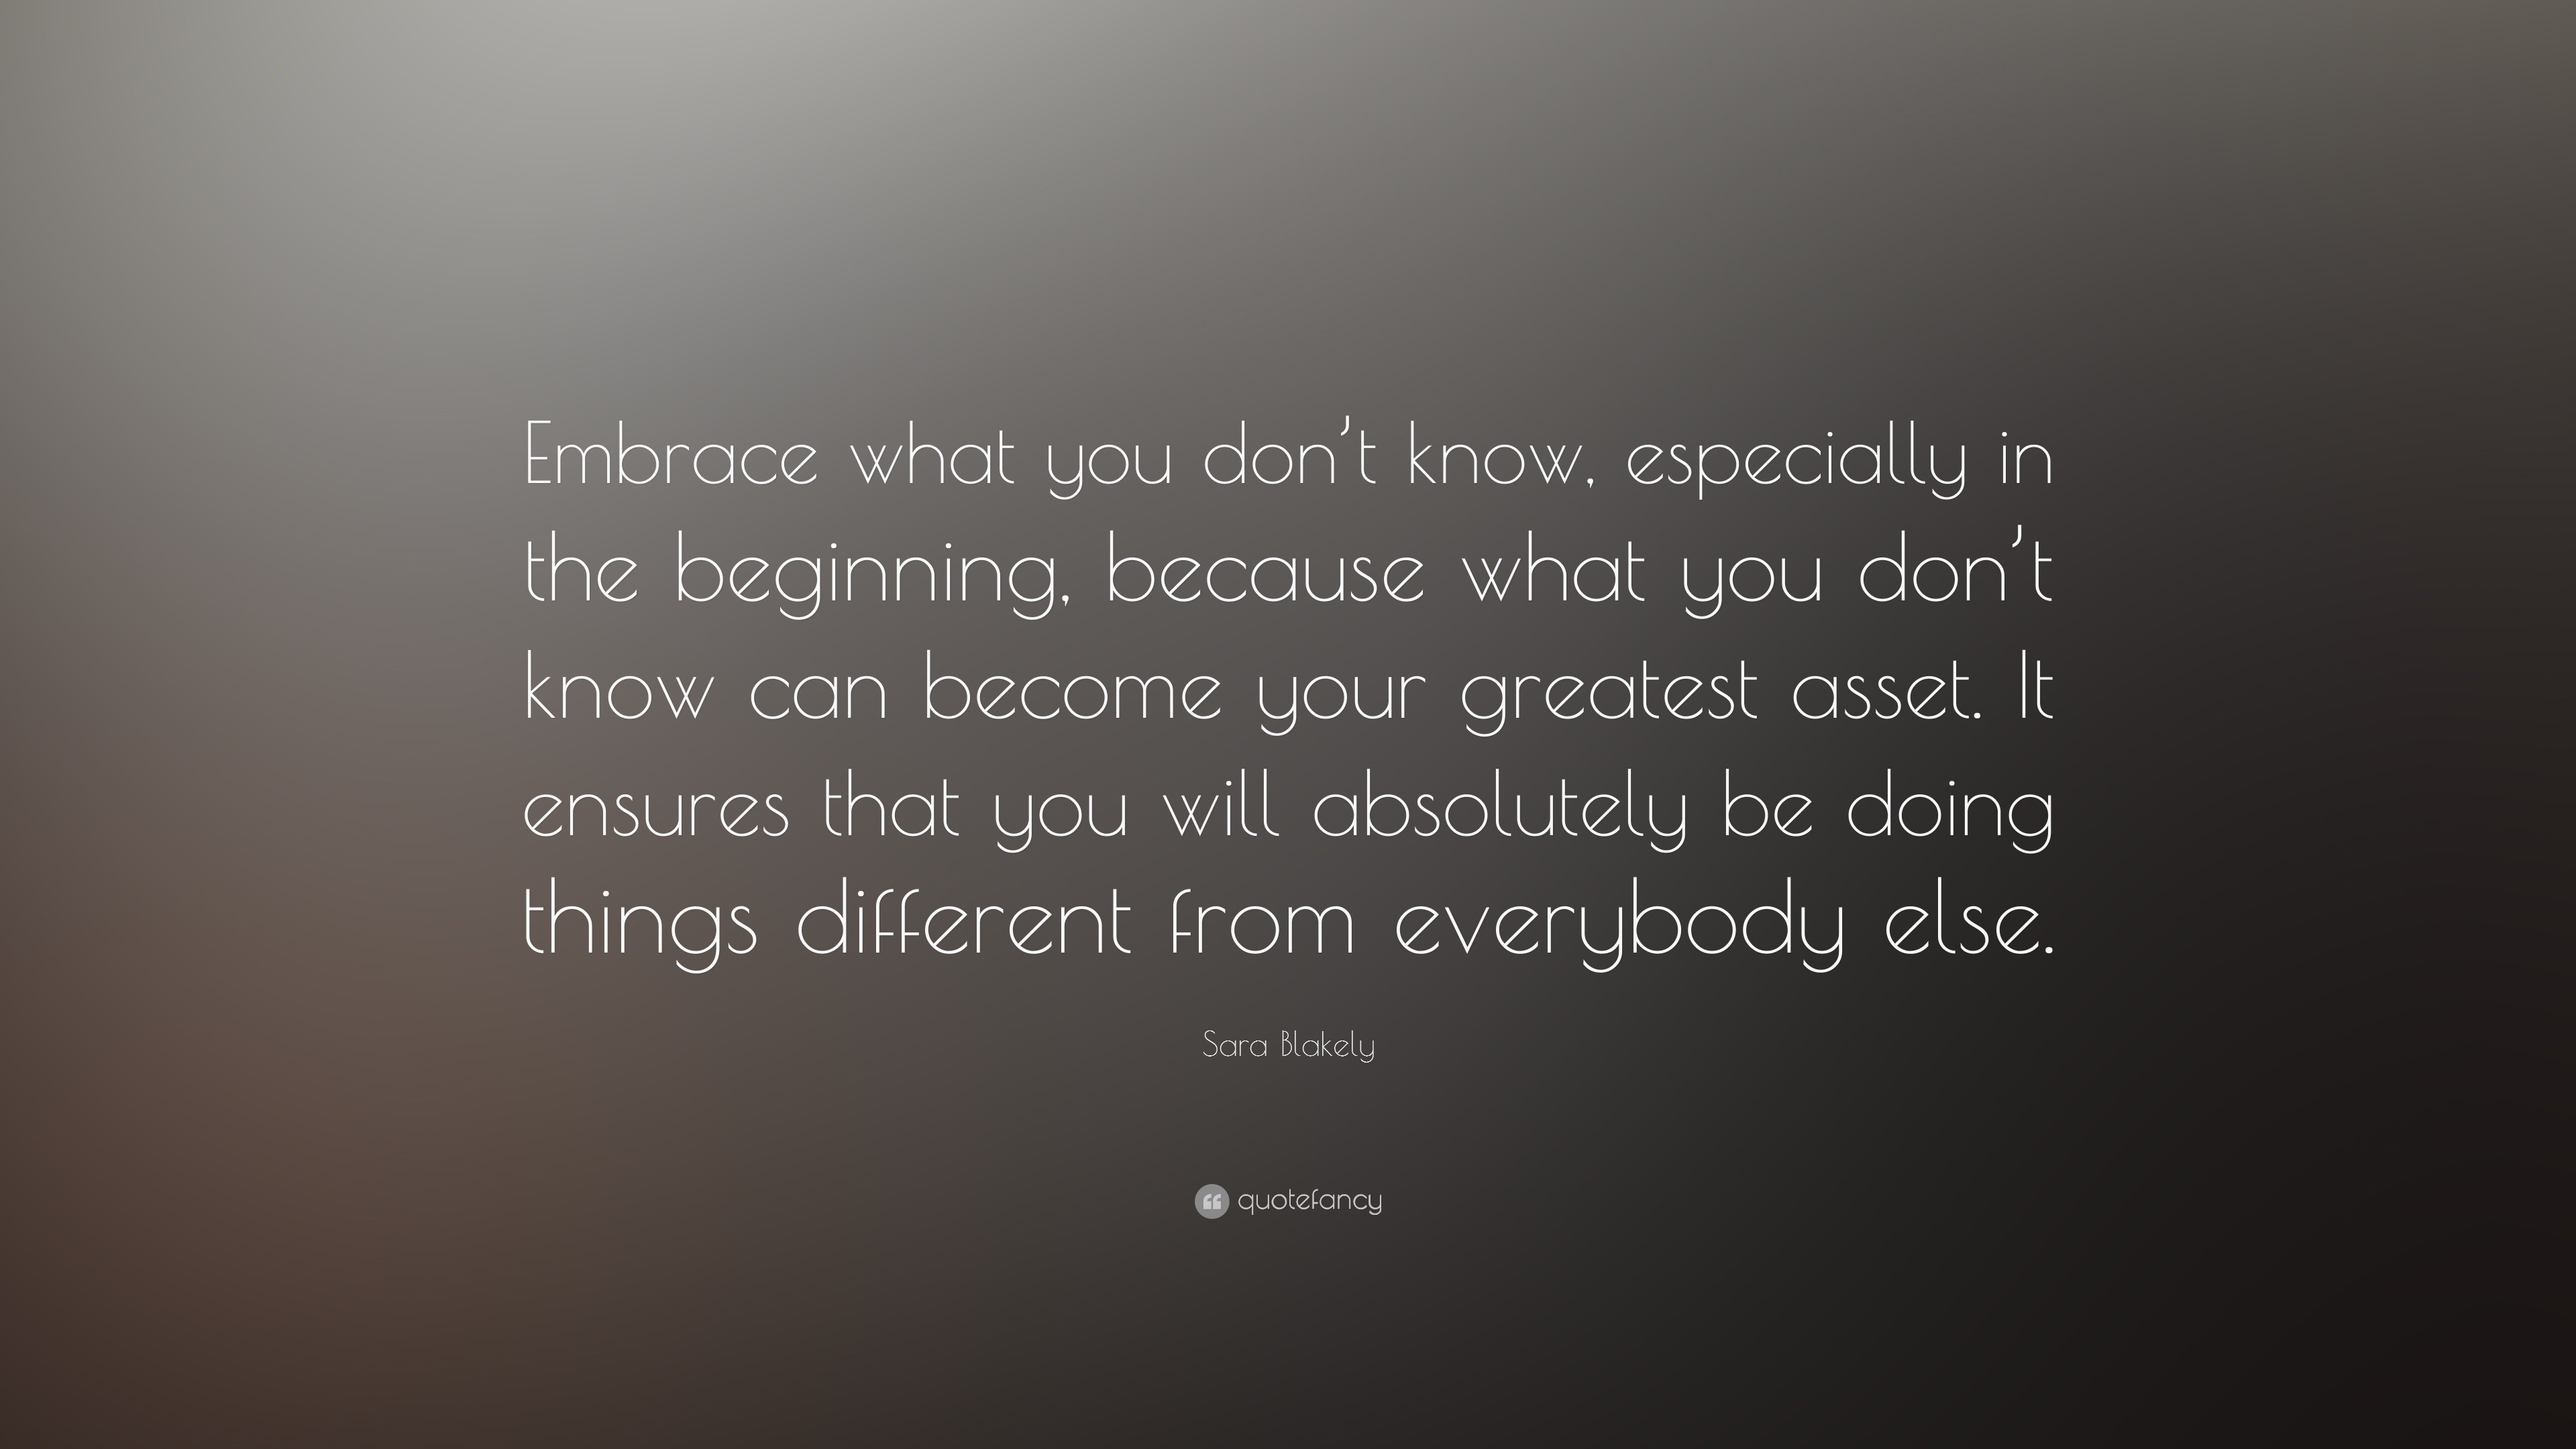 Sara Blakely Quote: “Embrace what you don’t know, especially in the ...